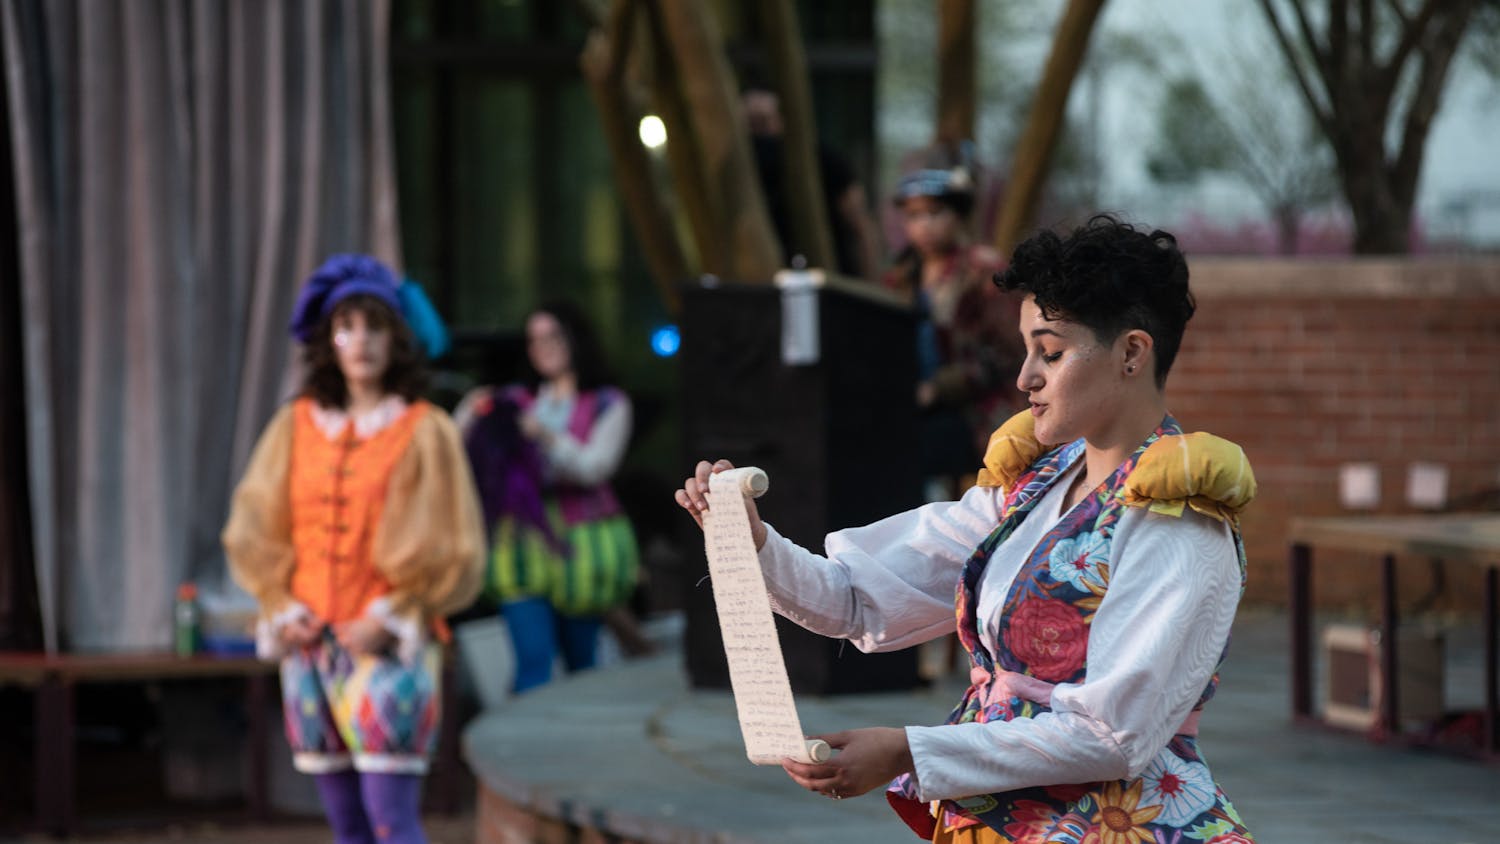 Performers of the USC Theatre Department take part in a production of “The Complete Works of William Shakespeare (Abridged),” performed on the Russell House patio stage in March 2021.